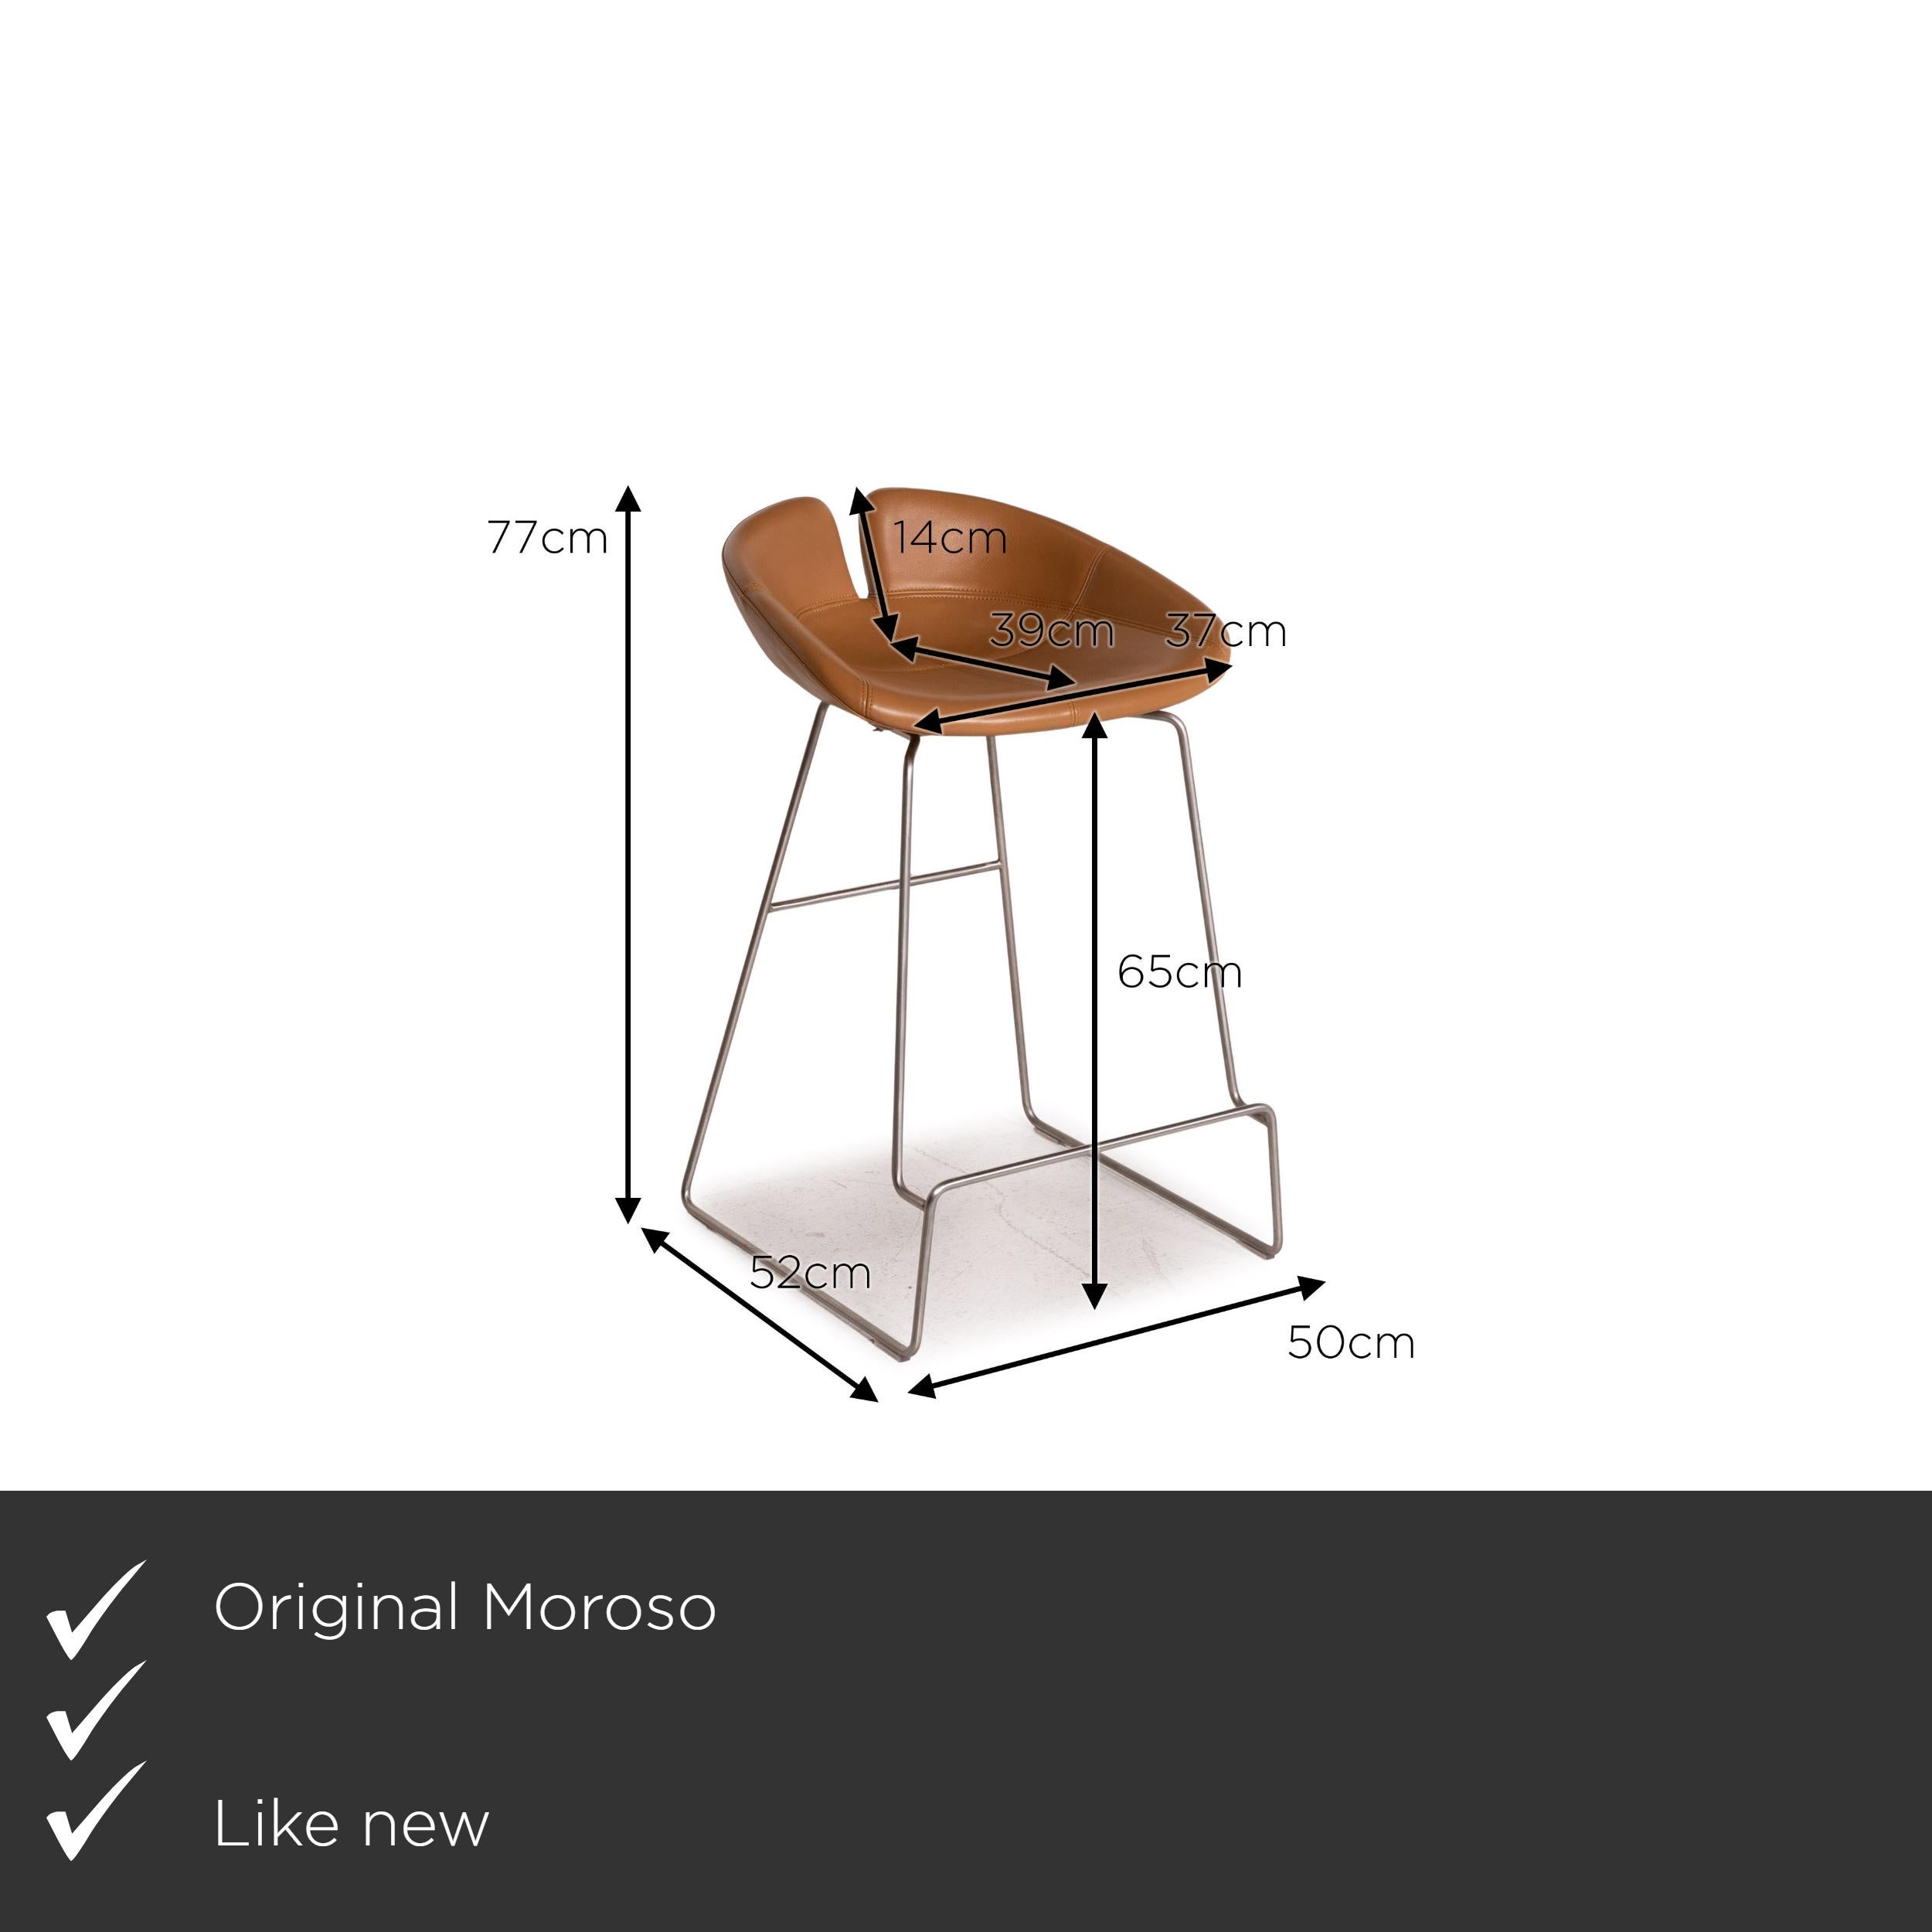 We present to you a Moroso Fjord leather bar stool cognac brown chair stool.

Product measurements in centimeters:

Depth 52
Width 50
Height 77
Seat height 65
Rest height 72
Seat depth 39
Seat width 37.
 
 
 
   